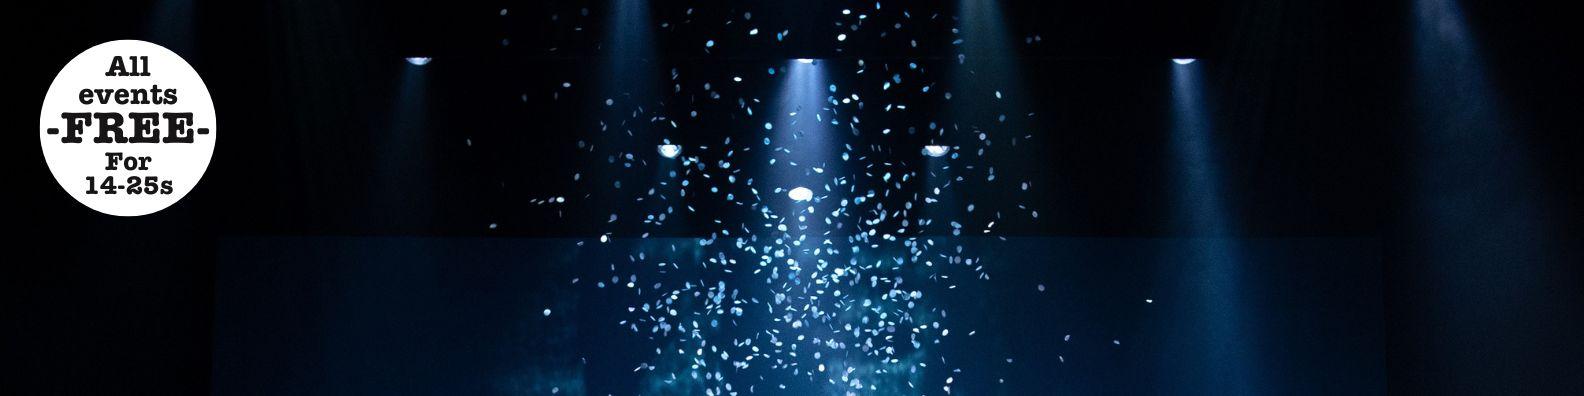 White confetti falling, highlighted by blue lights.